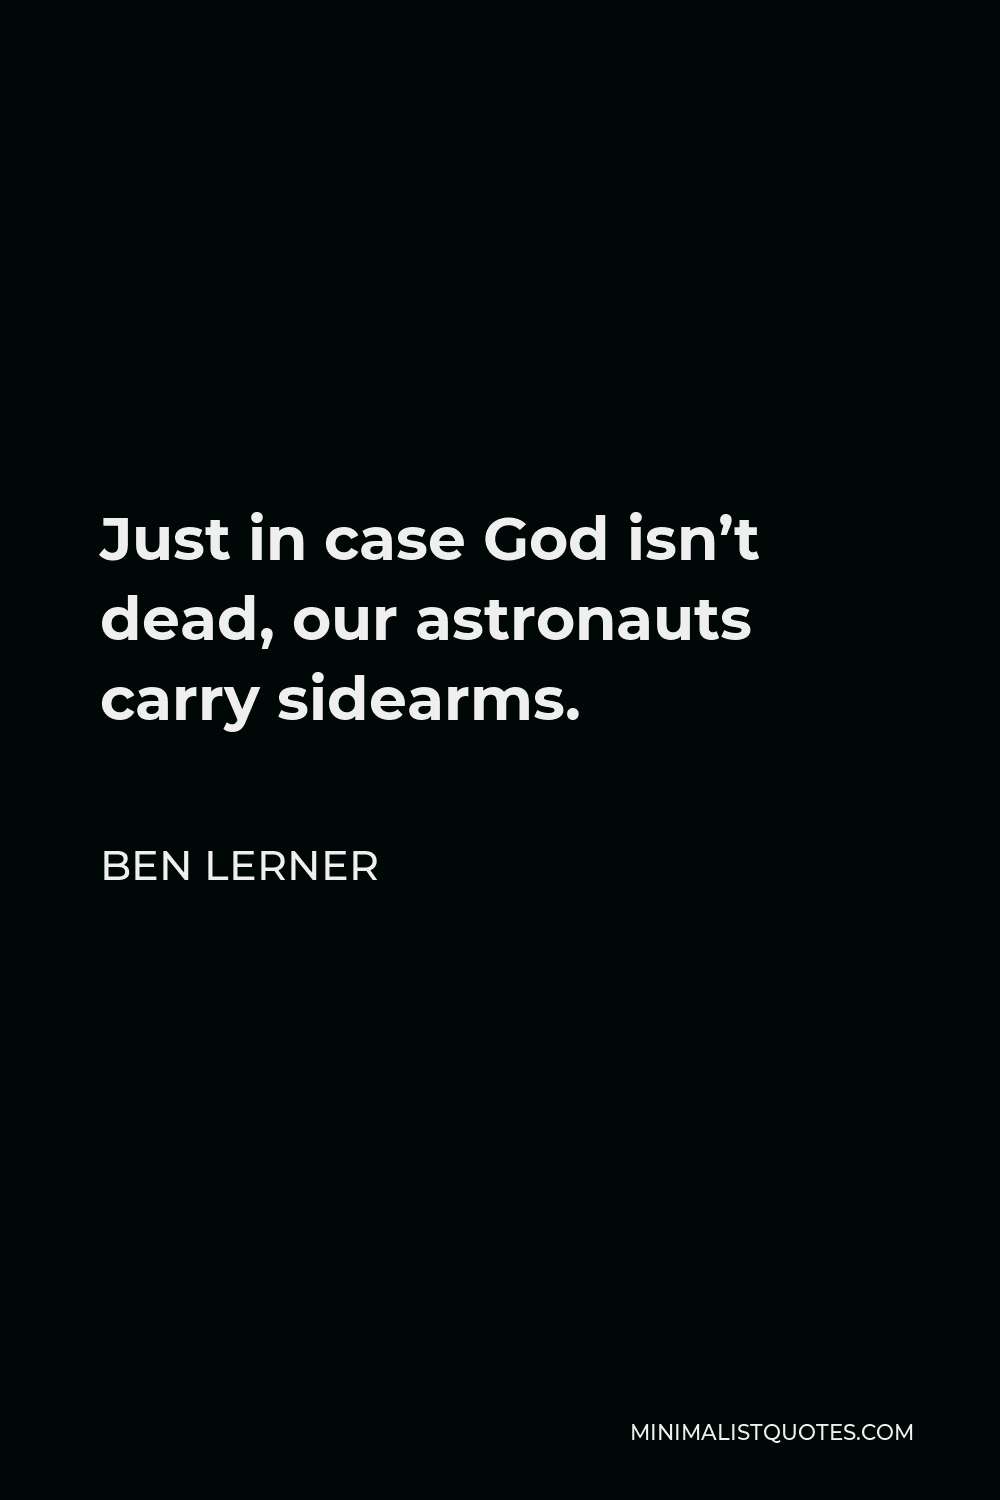 Ben Lerner Quote - Just in case God isn’t dead, our astronauts carry sidearms.